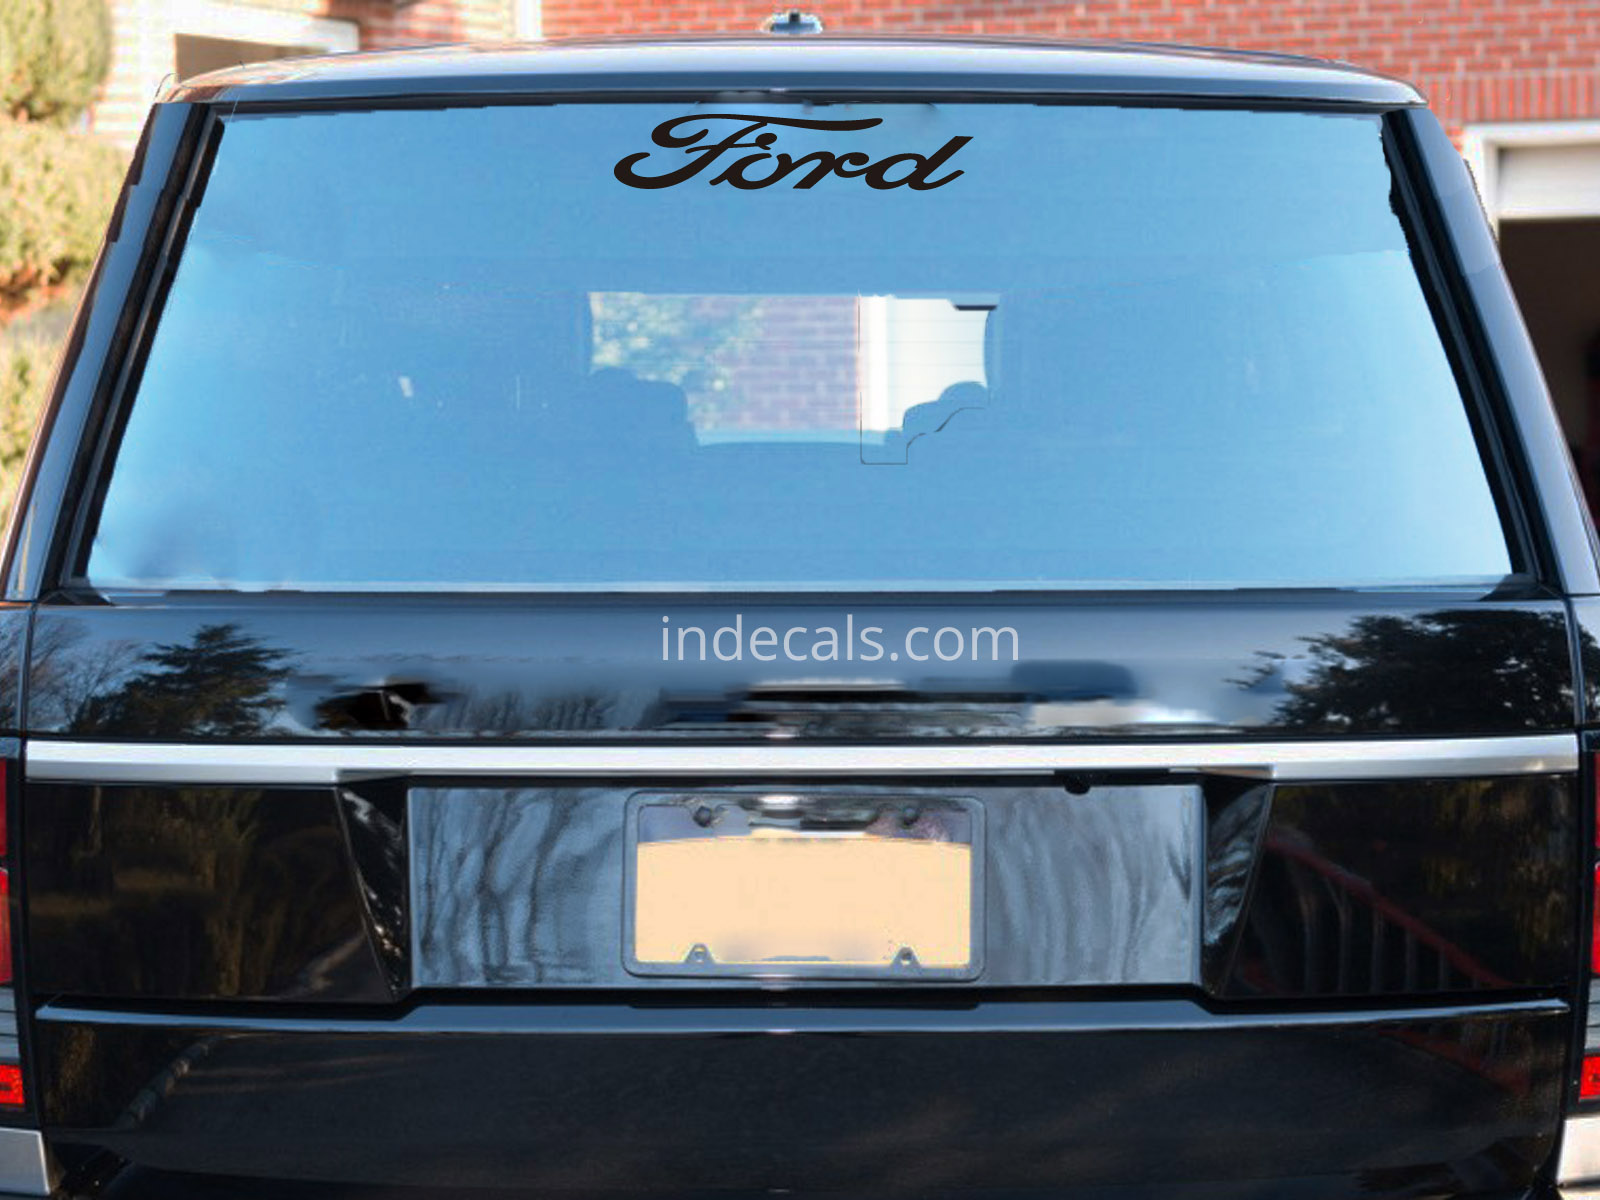 1 x Ford Sticker for Windshield or Back Window - Black